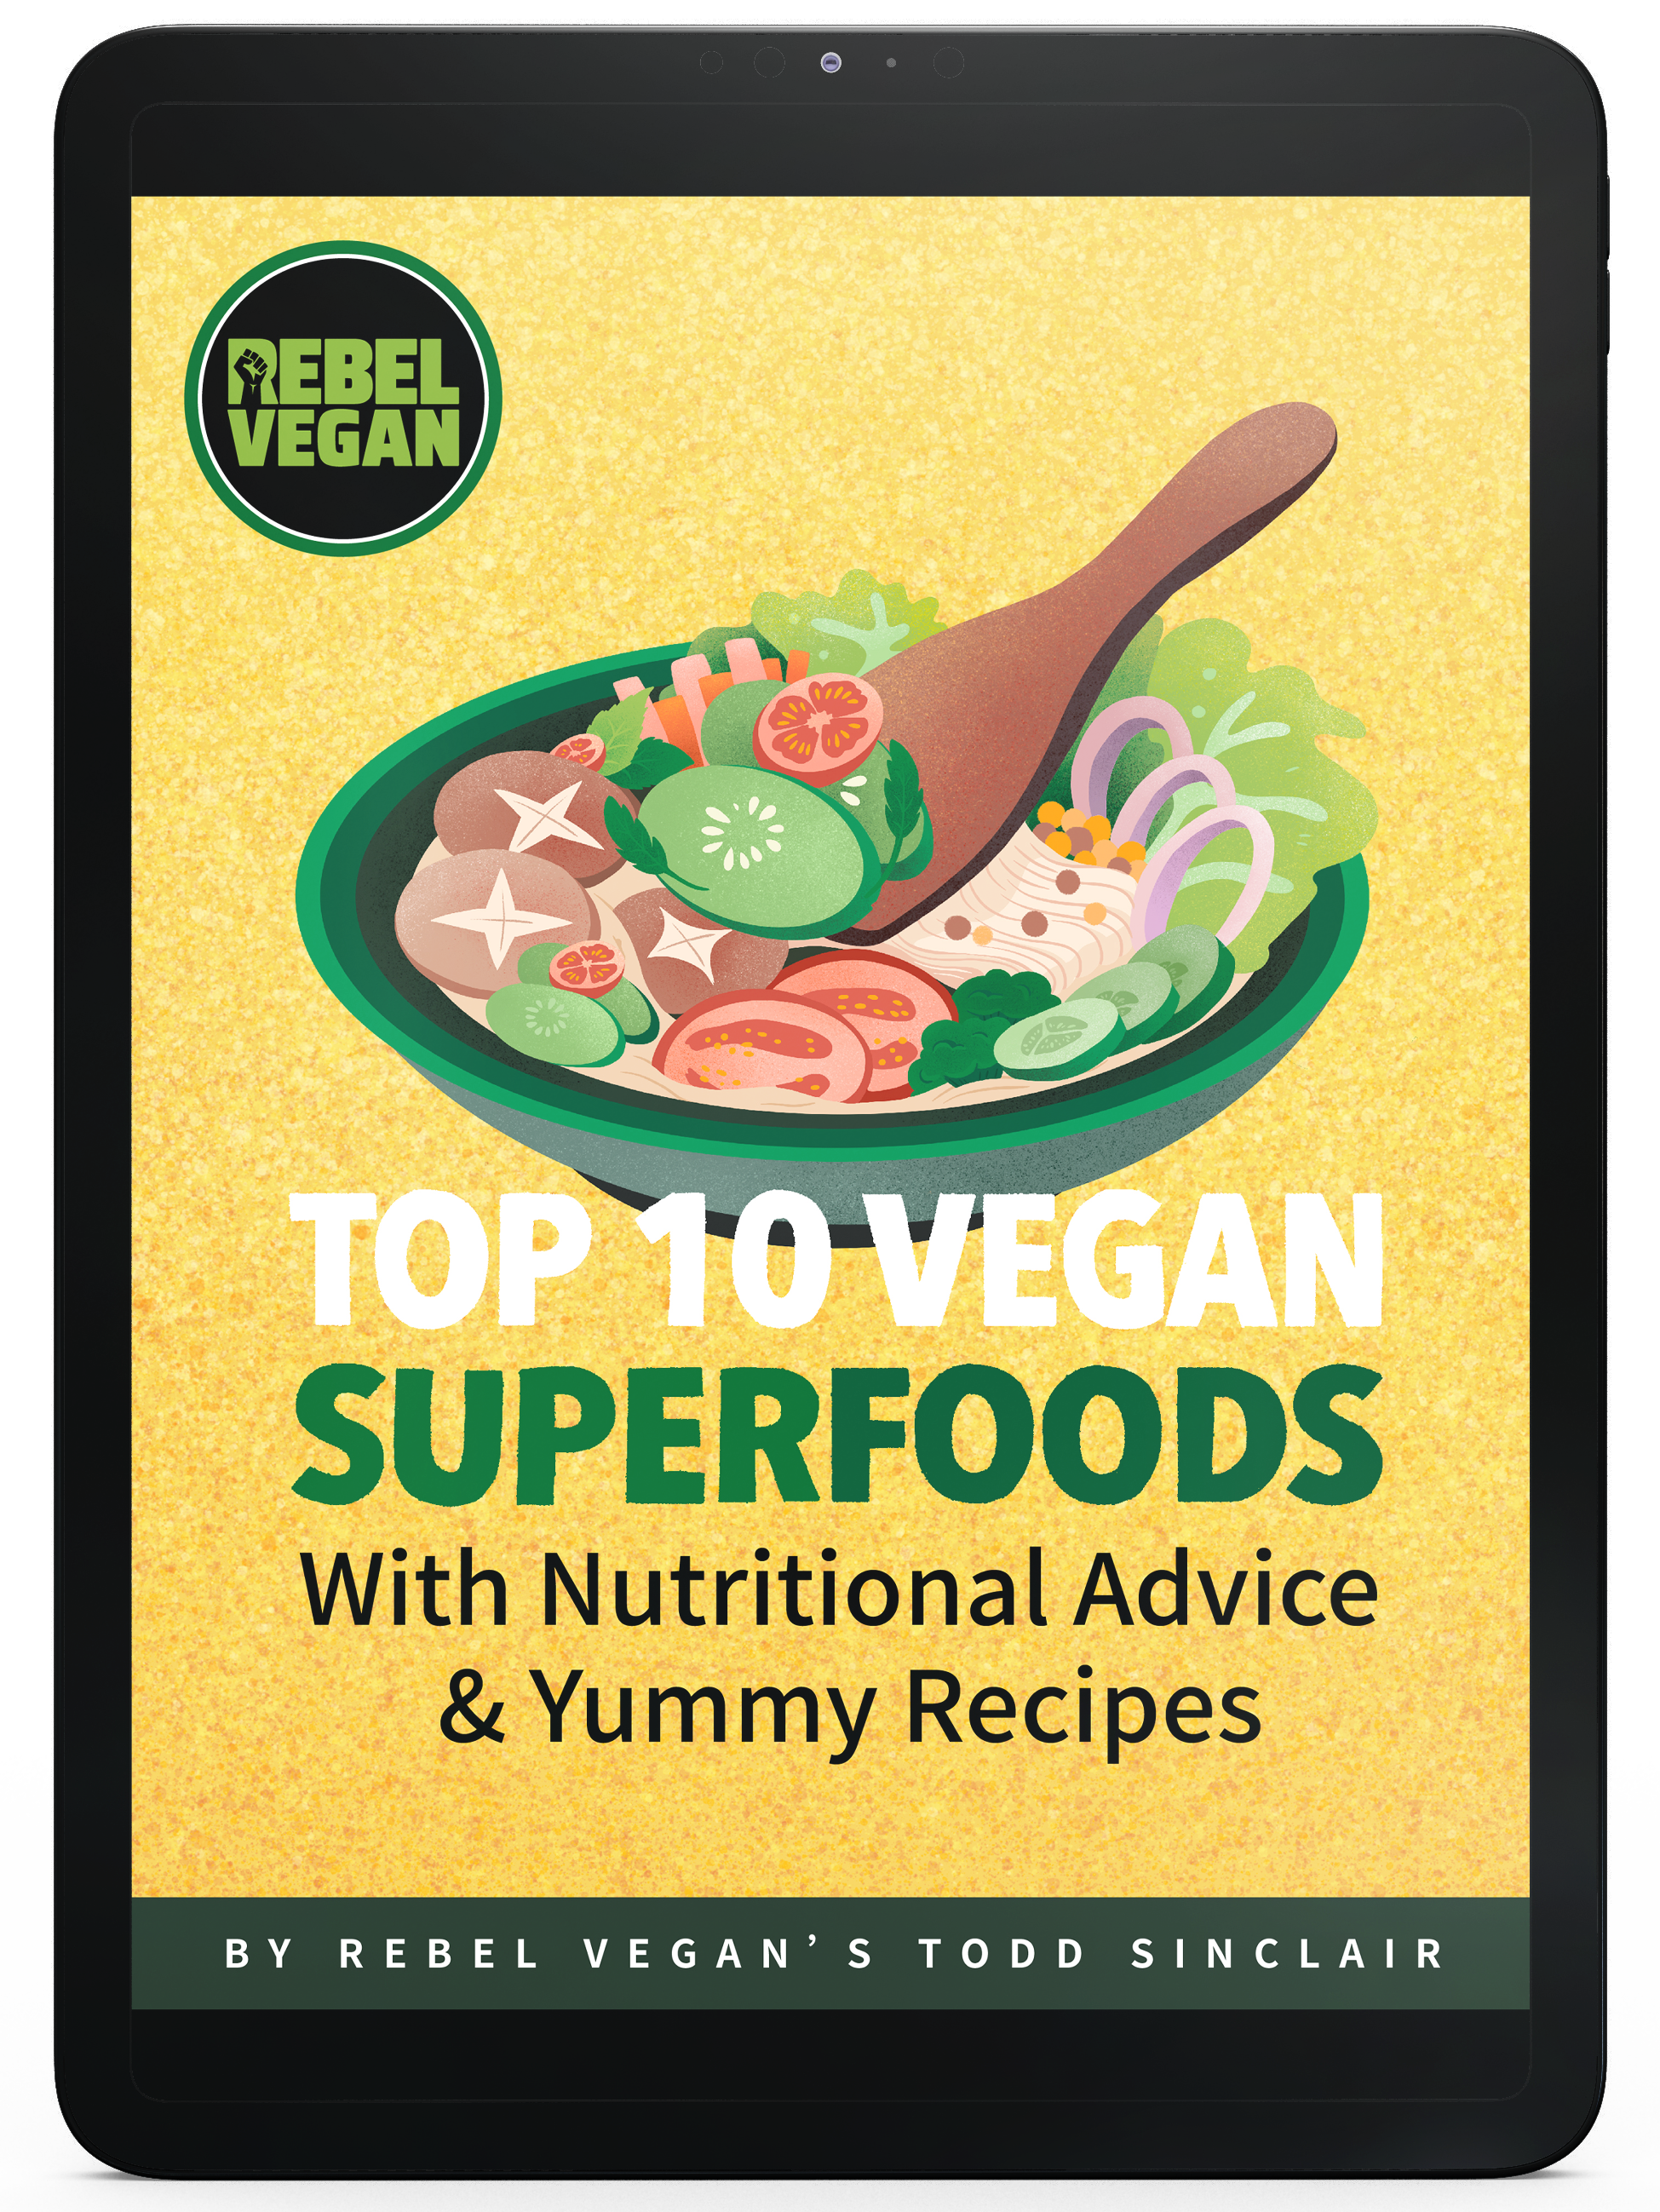 Superfoods recipes for download